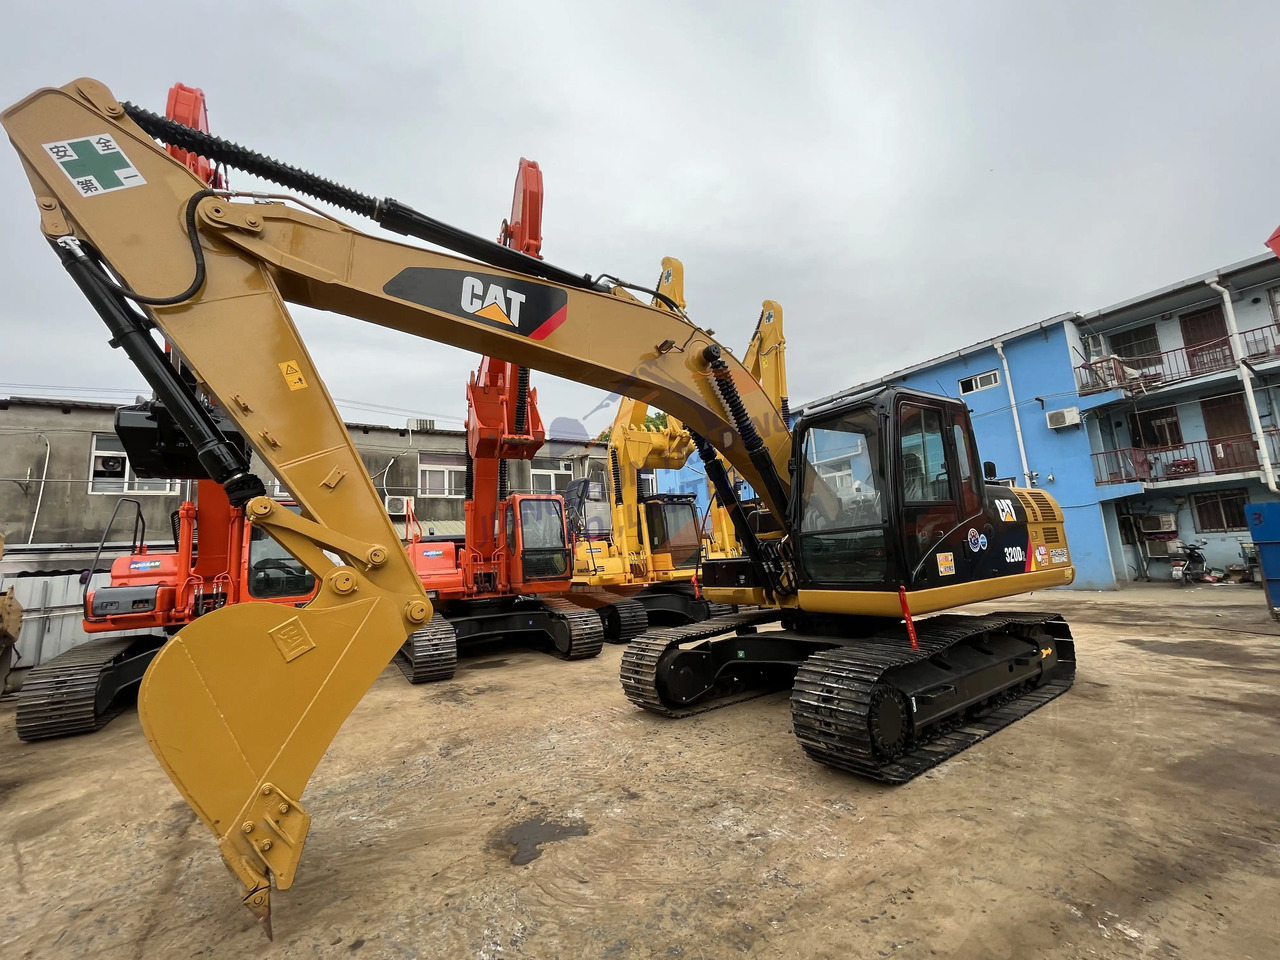 Leasing  2019 Year Original Used Good Price Excavator Caterpillar 320d2,Cat 320d With Operating Weight 20ton 2019 Year Original Used Good Price Excavator Caterpillar 320d2,Cat 320d With Operating Weight 20ton: φωτογραφία 5